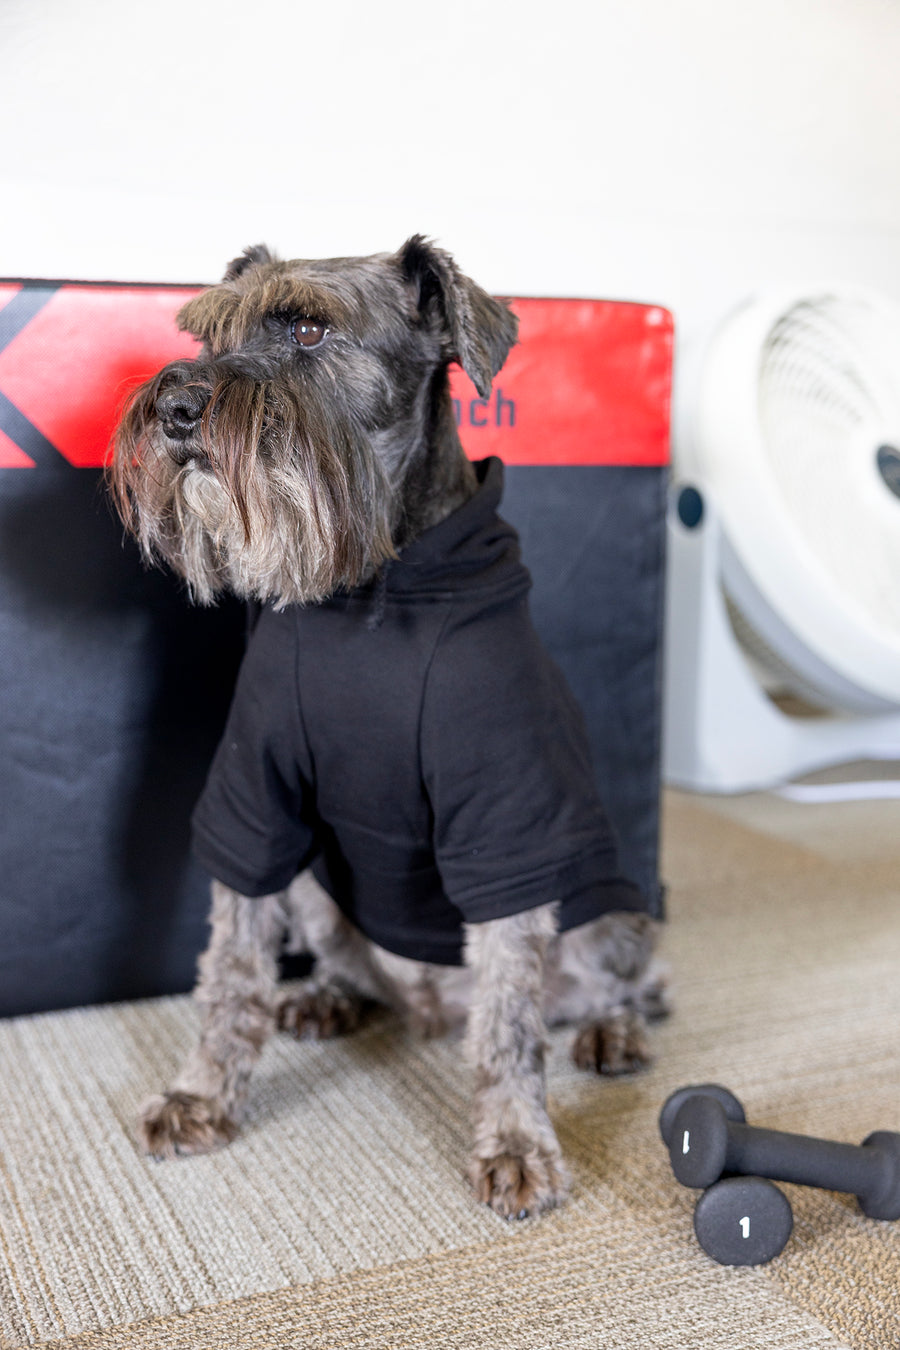 Dog sweater for cold weather, showing front chest of black dog hoodie, fit for anxiety relief in dogs, calm pet with cute dog clothes